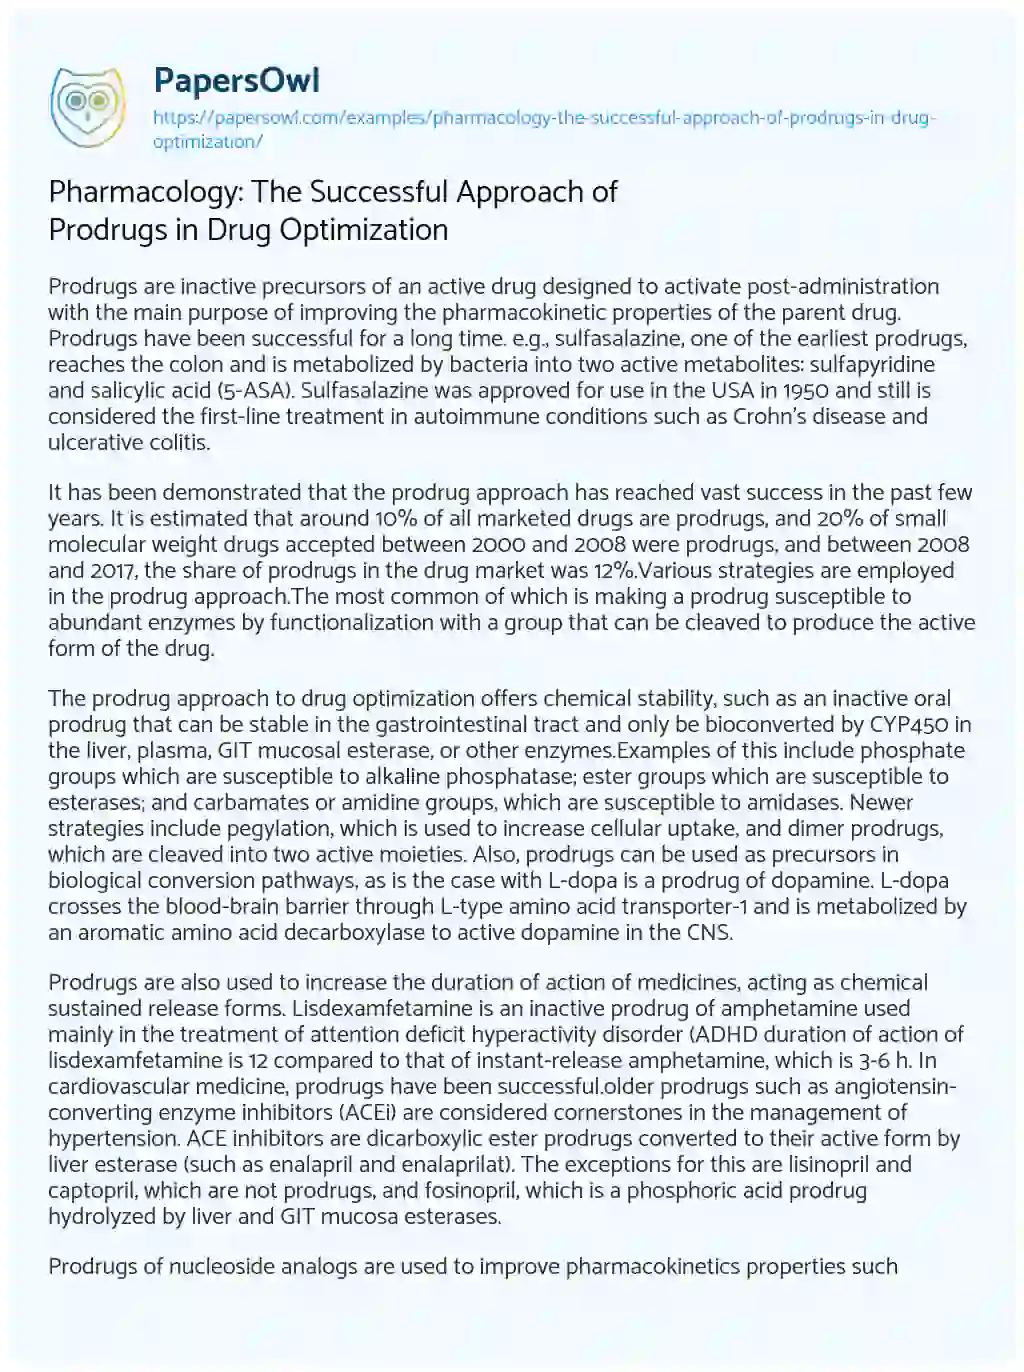 Essay on Pharmacology: the Successful Approach of Prodrugs in Drug Optimization